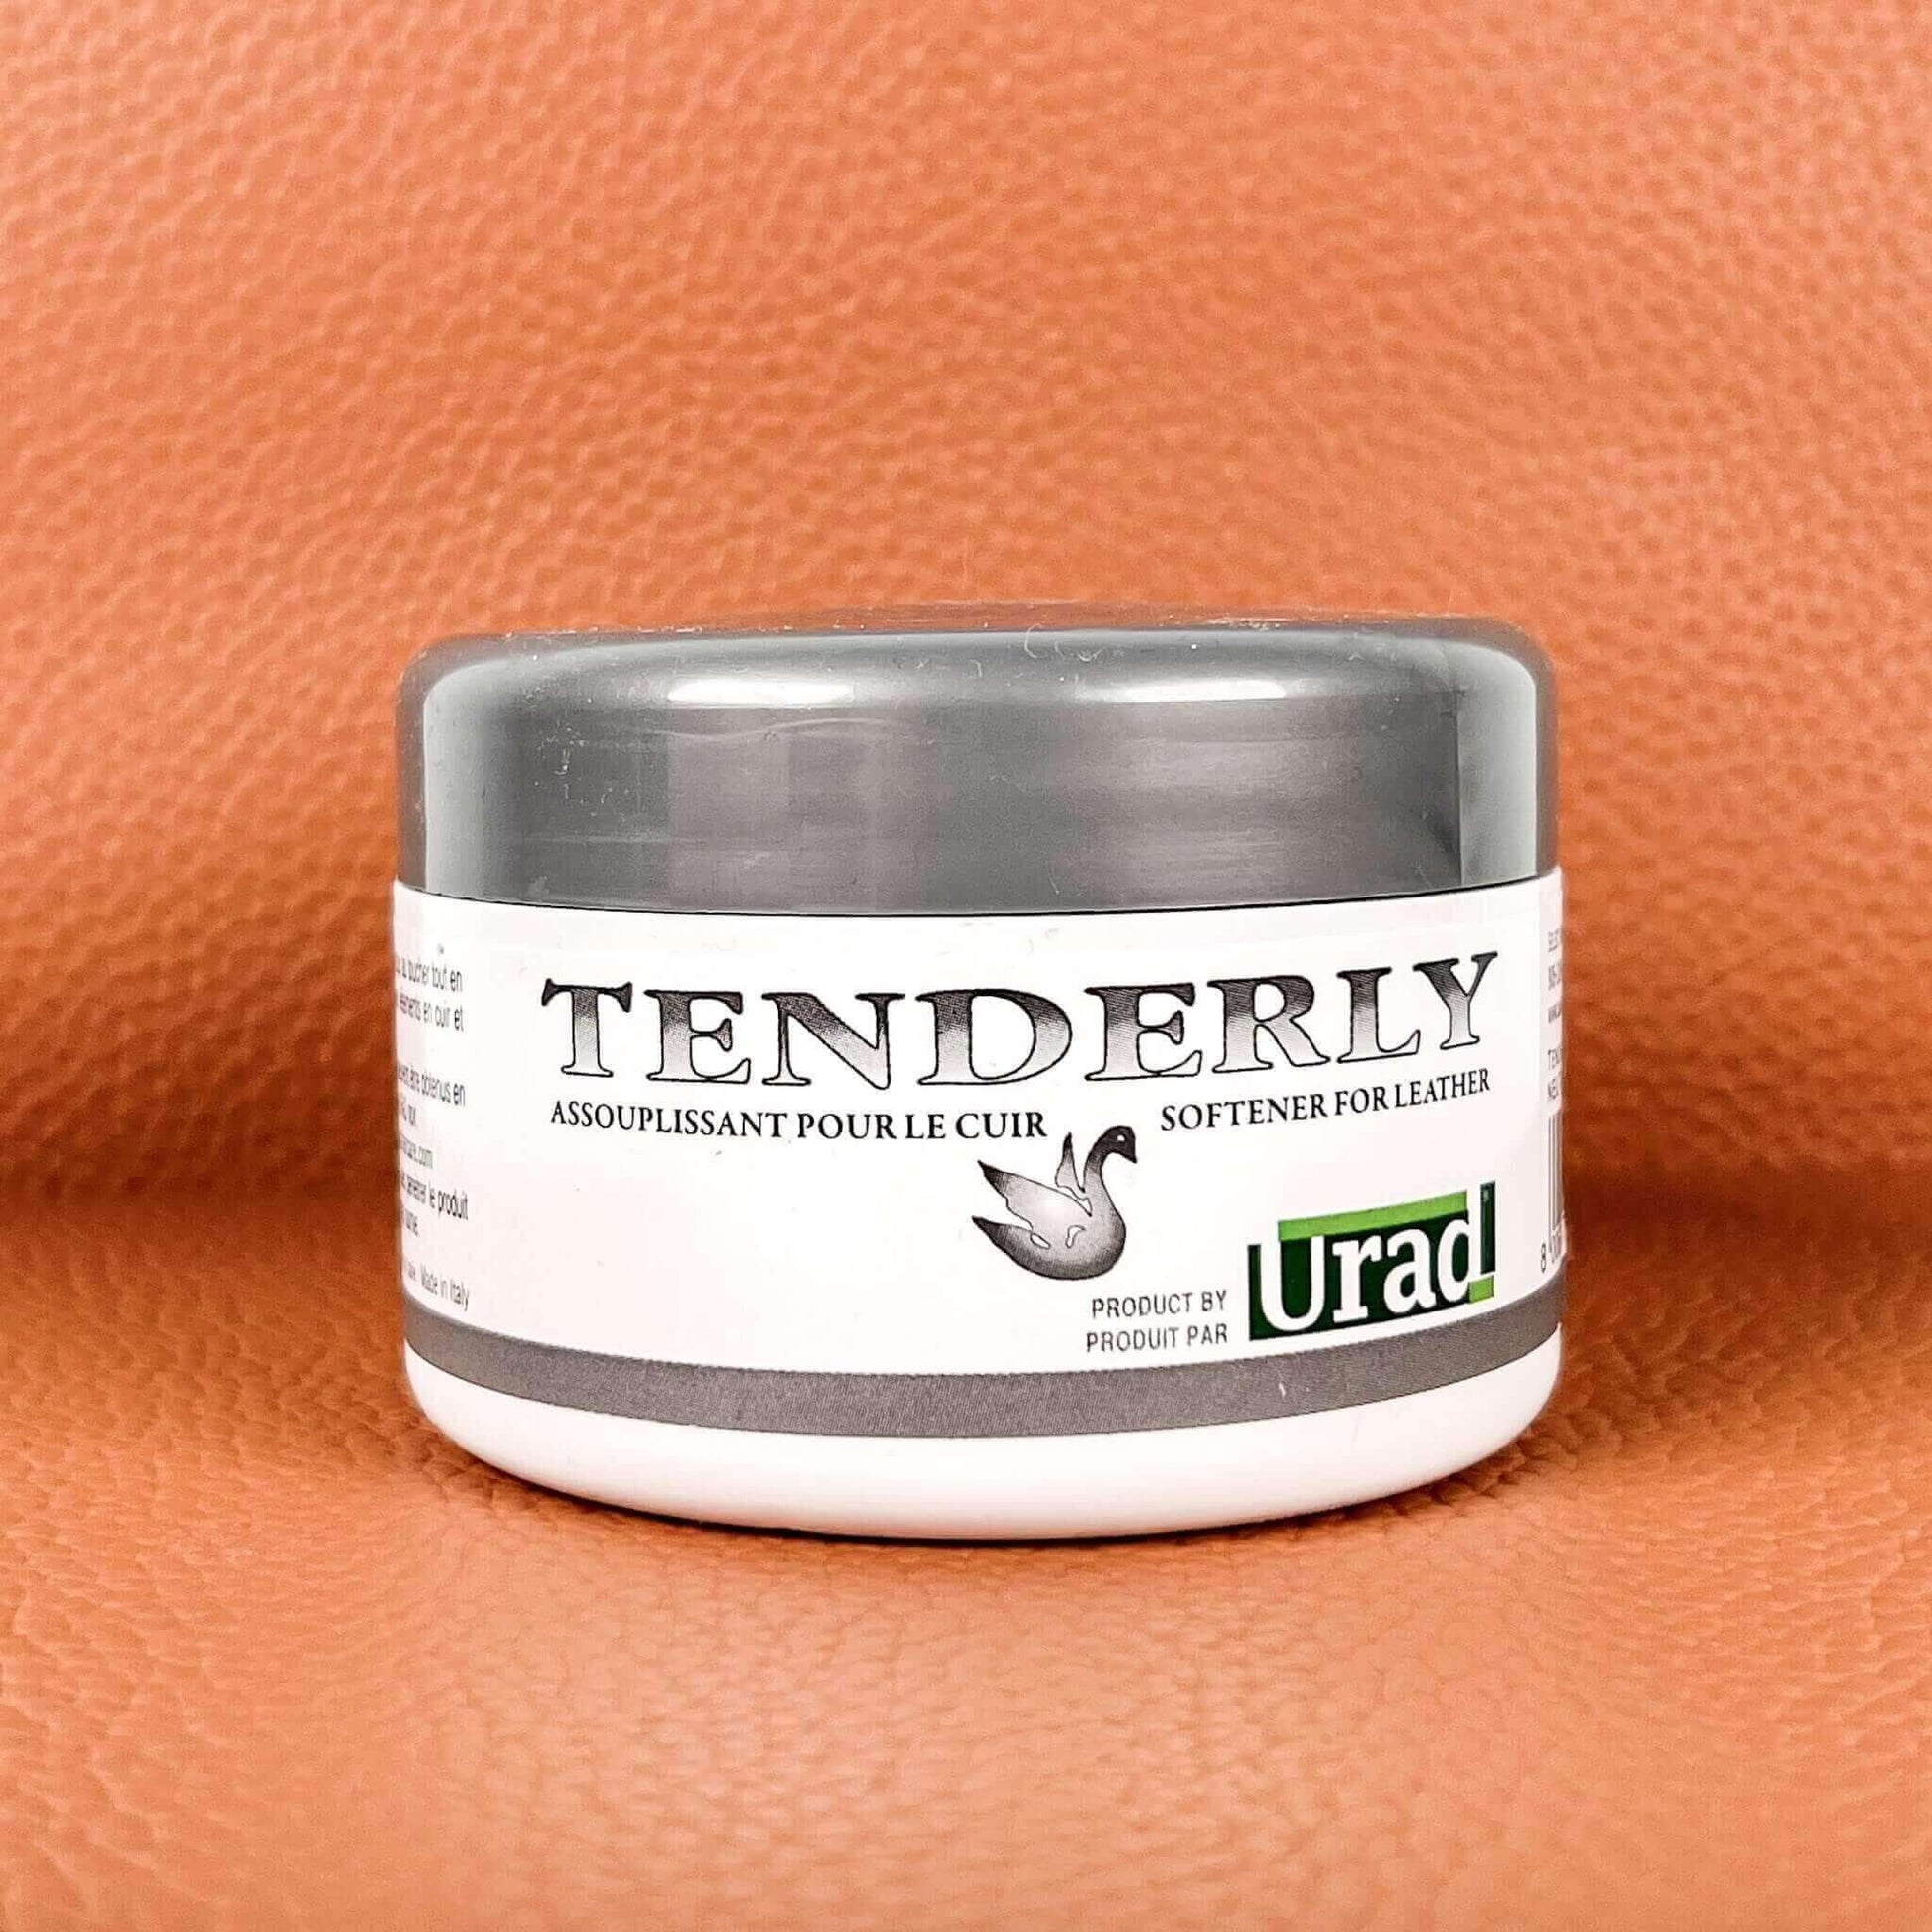 If you're looking for a reliable leather softener for shoes and boots, Tenderly leather softener is a great option to consider. Its specialized formula deeply penetrates the leather fibers, providing long-lasting softness.